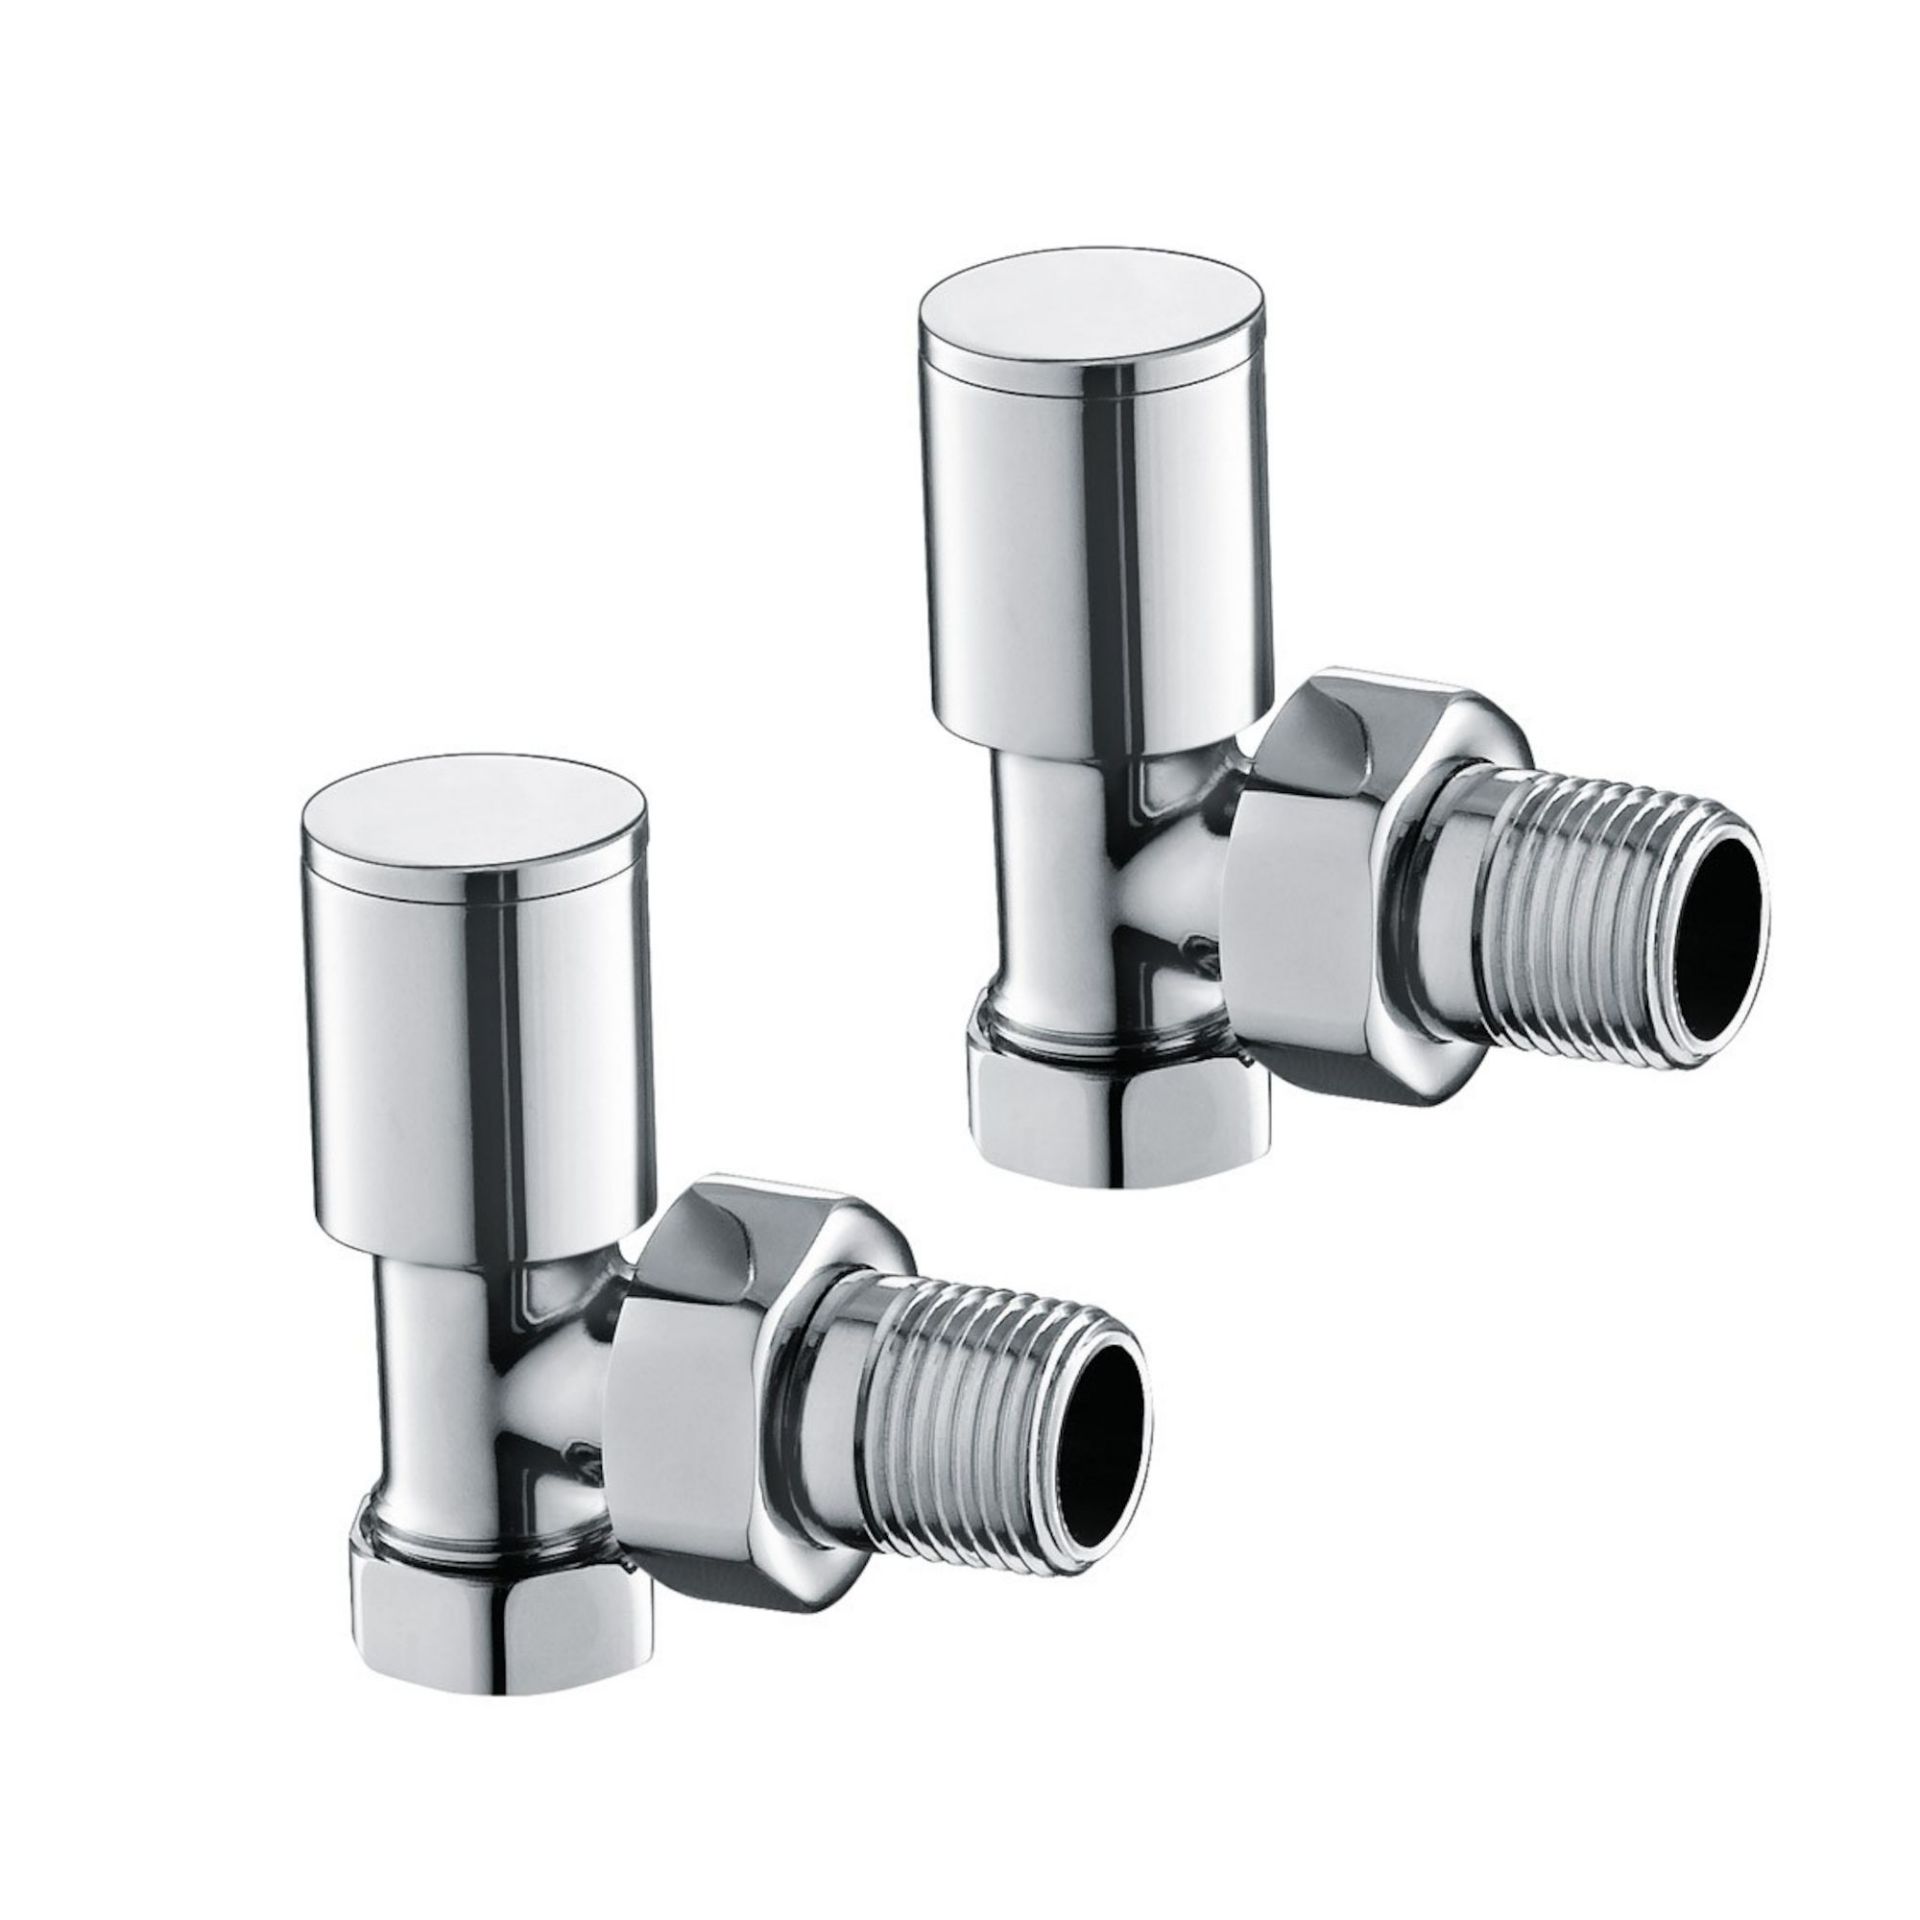 (PM1022) 15mm Standard Connection Angled Radiator Valves - Heavy Duty Polished Chrome Plated Br... - Image 2 of 3